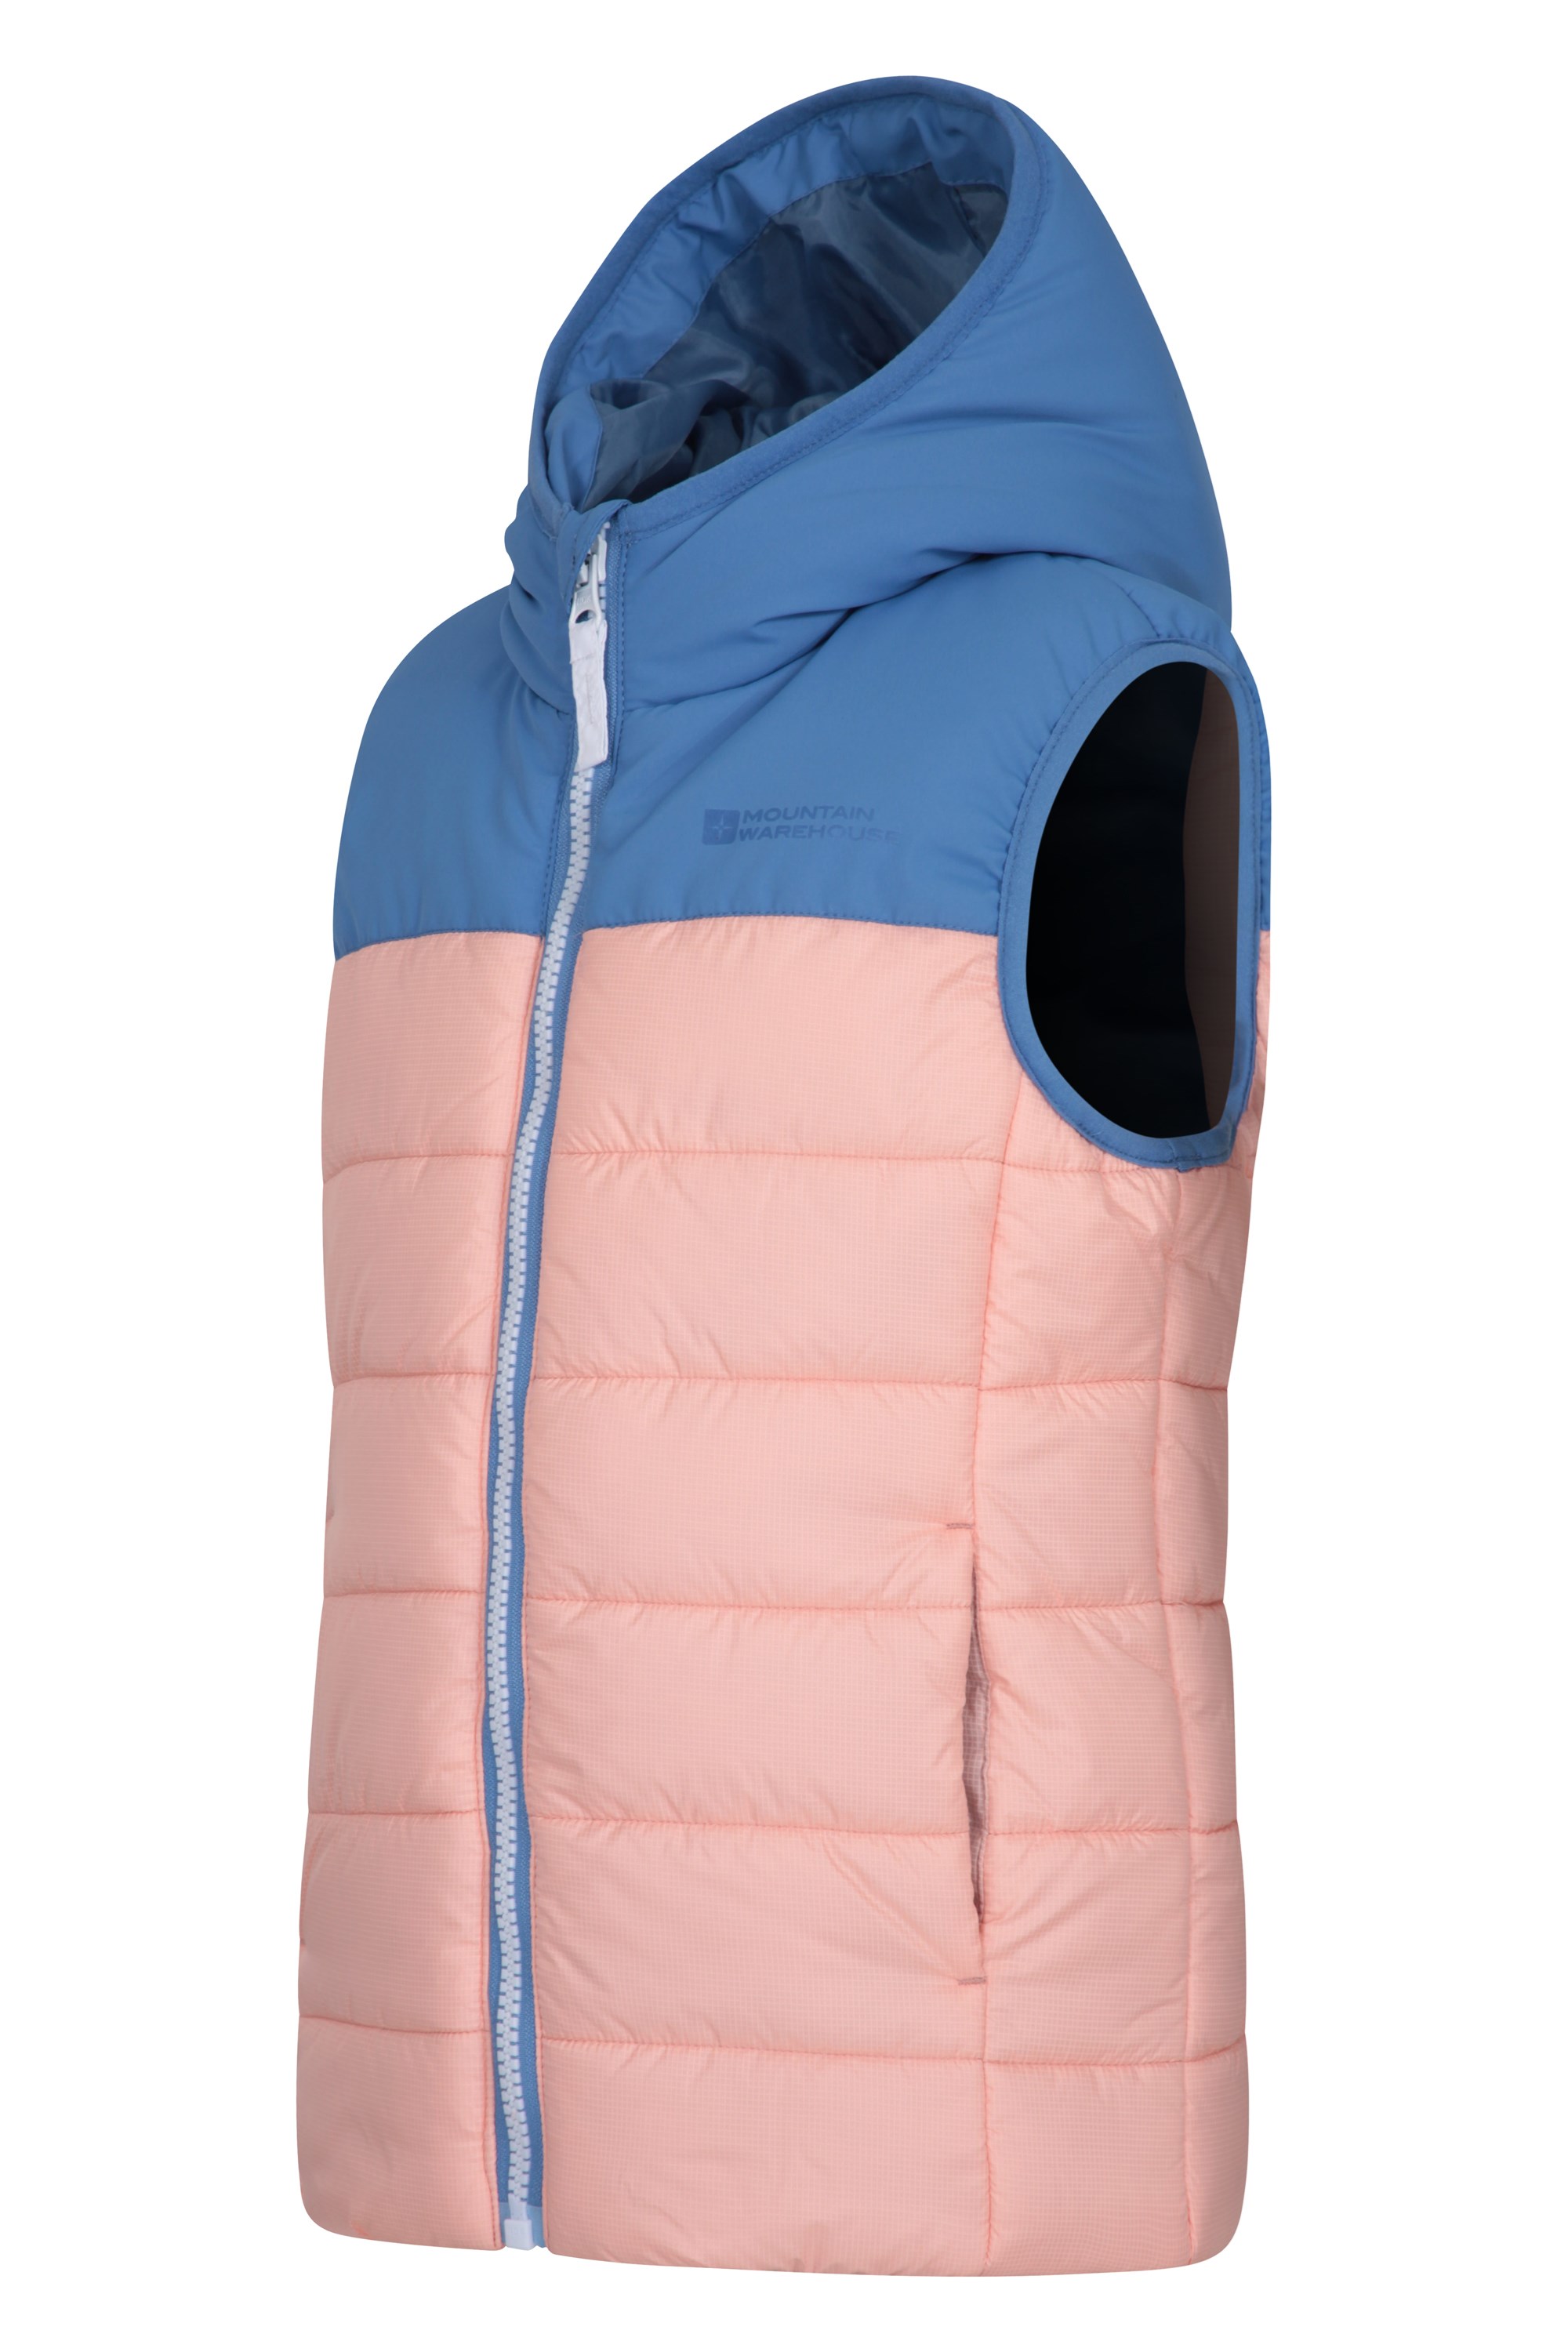 Water Resistant Rain Coat Microfibre Padded Winter Vest Body Warmer for Boys & Girls Mountain Warehouse Rocko Kids Padded Gilet Two Front Pockets Childrens Jacket 